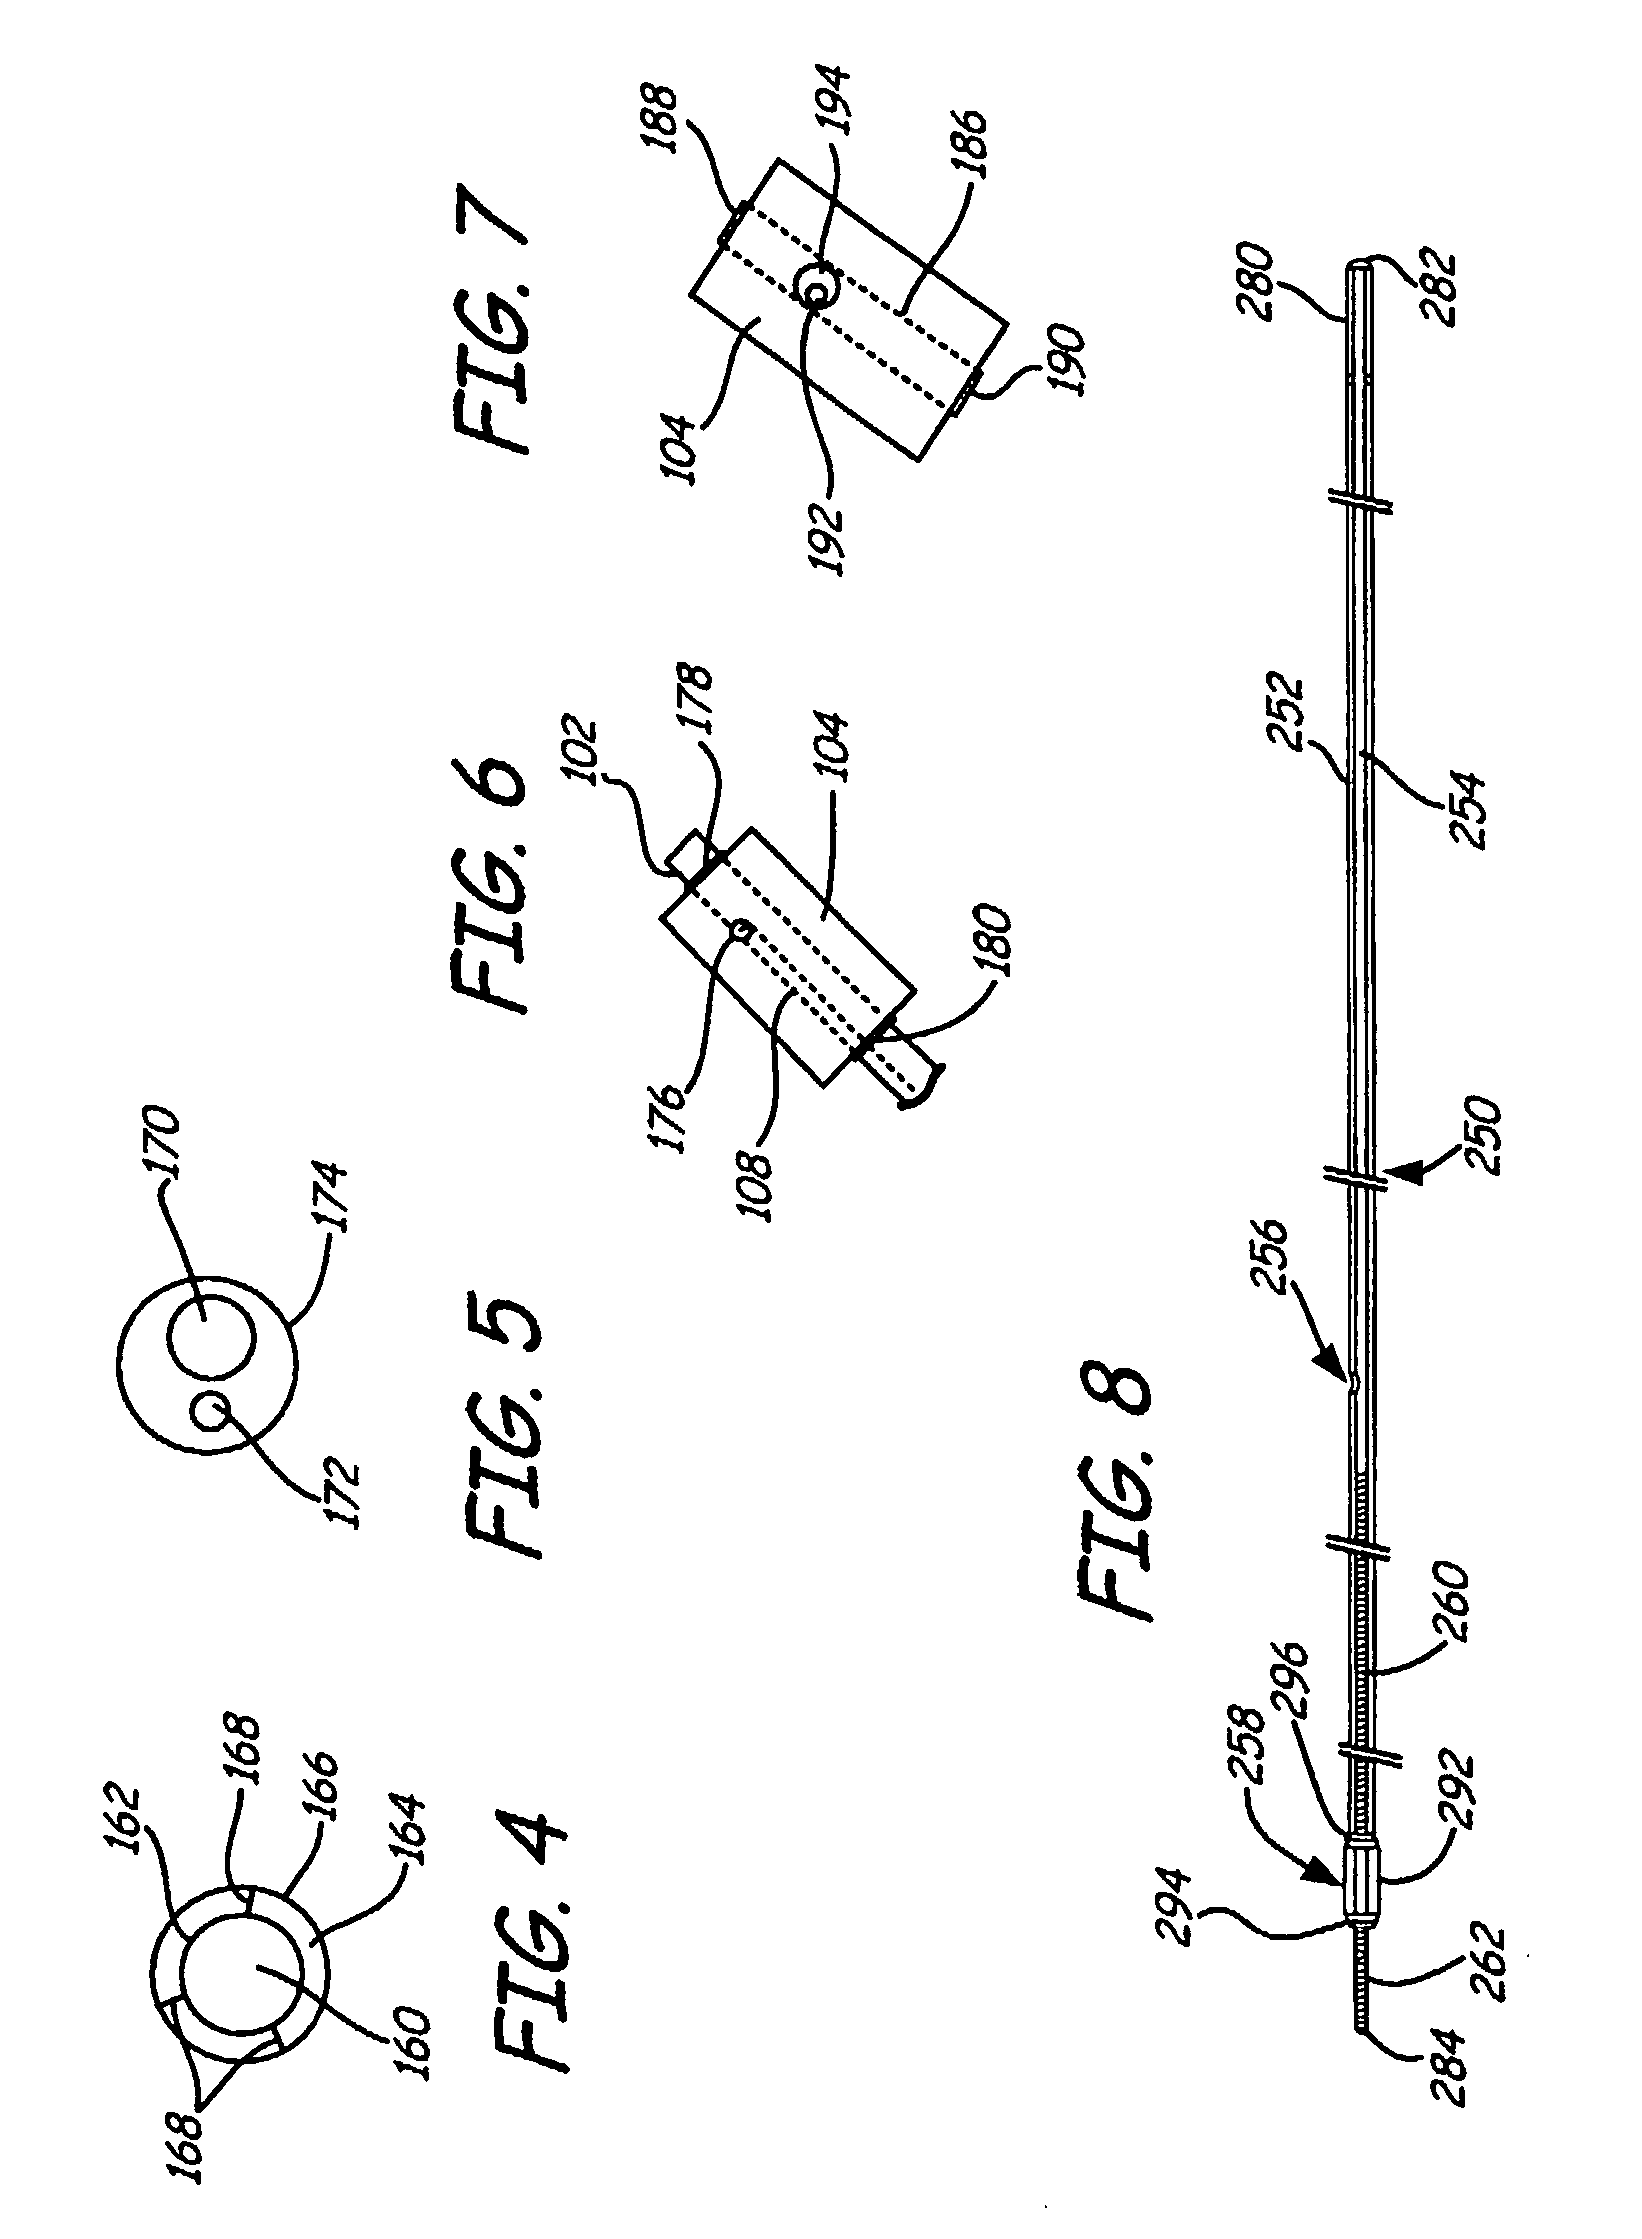 Extendable Device On An Aspiration Catheter